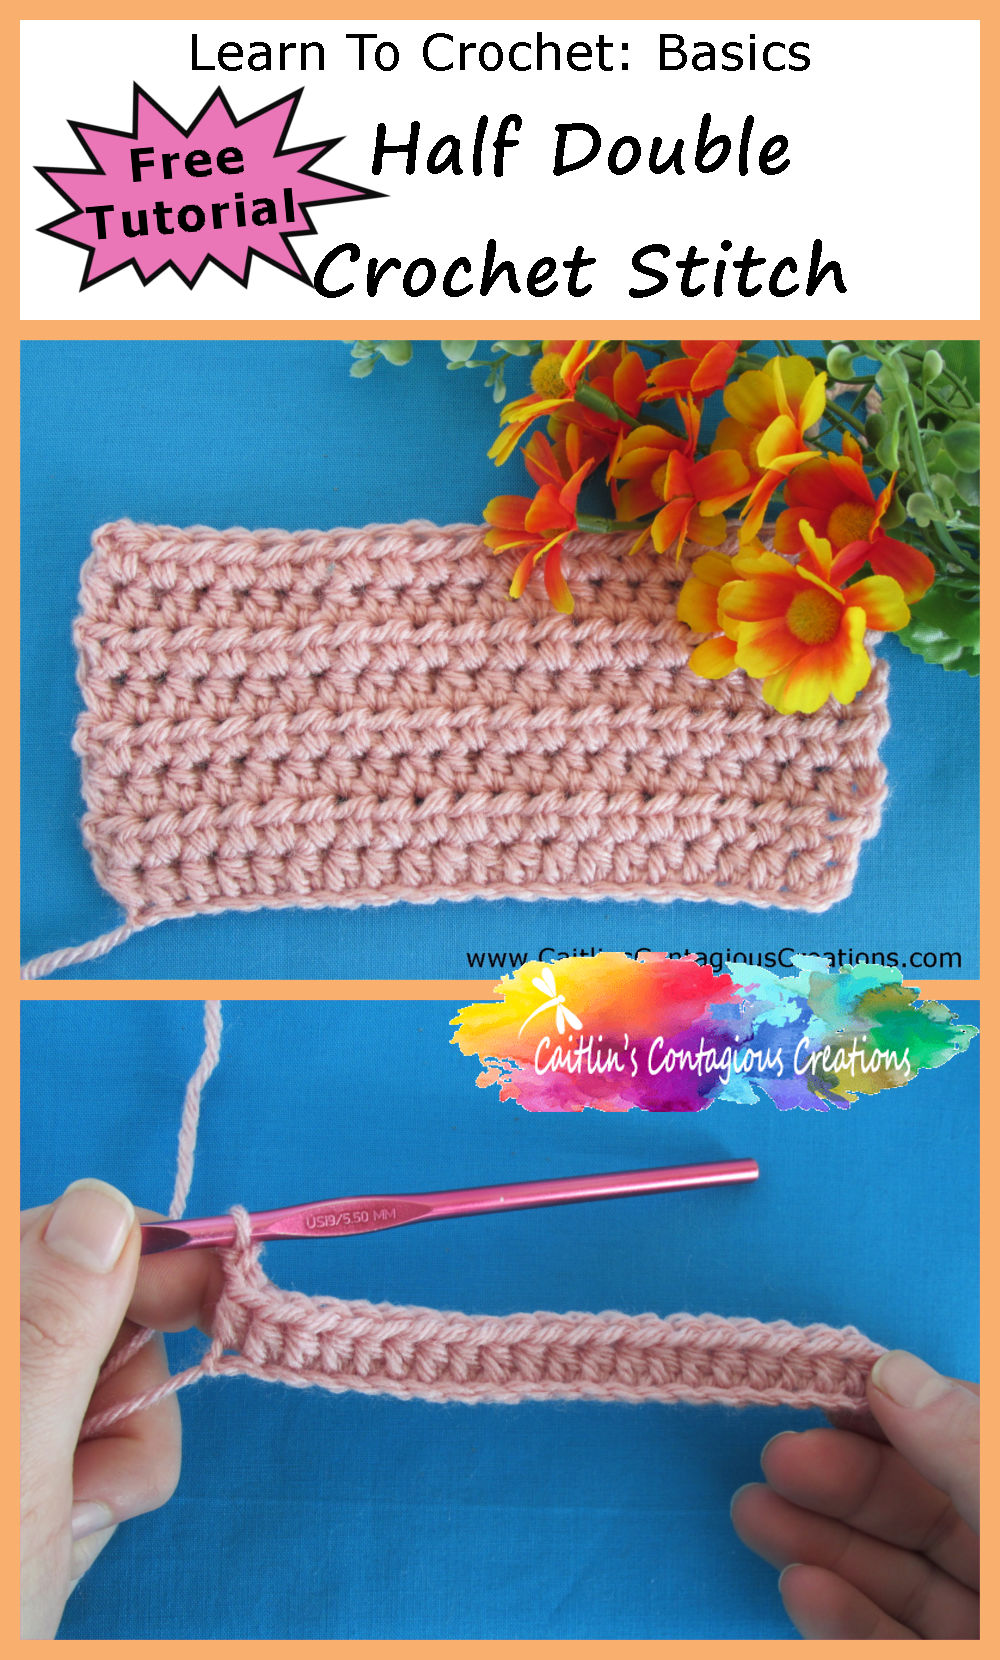 This free Half Double Crochet Stitch tutorial from Caitlin's Contagious Creations guides you through completing a basic crochet skill, the half double crochet (HDC). Featuring easy to follow, step by step written directions and pictured instructions, you will be working this essentail crochet skill in no time! #LearnToCrochet #Crochet101